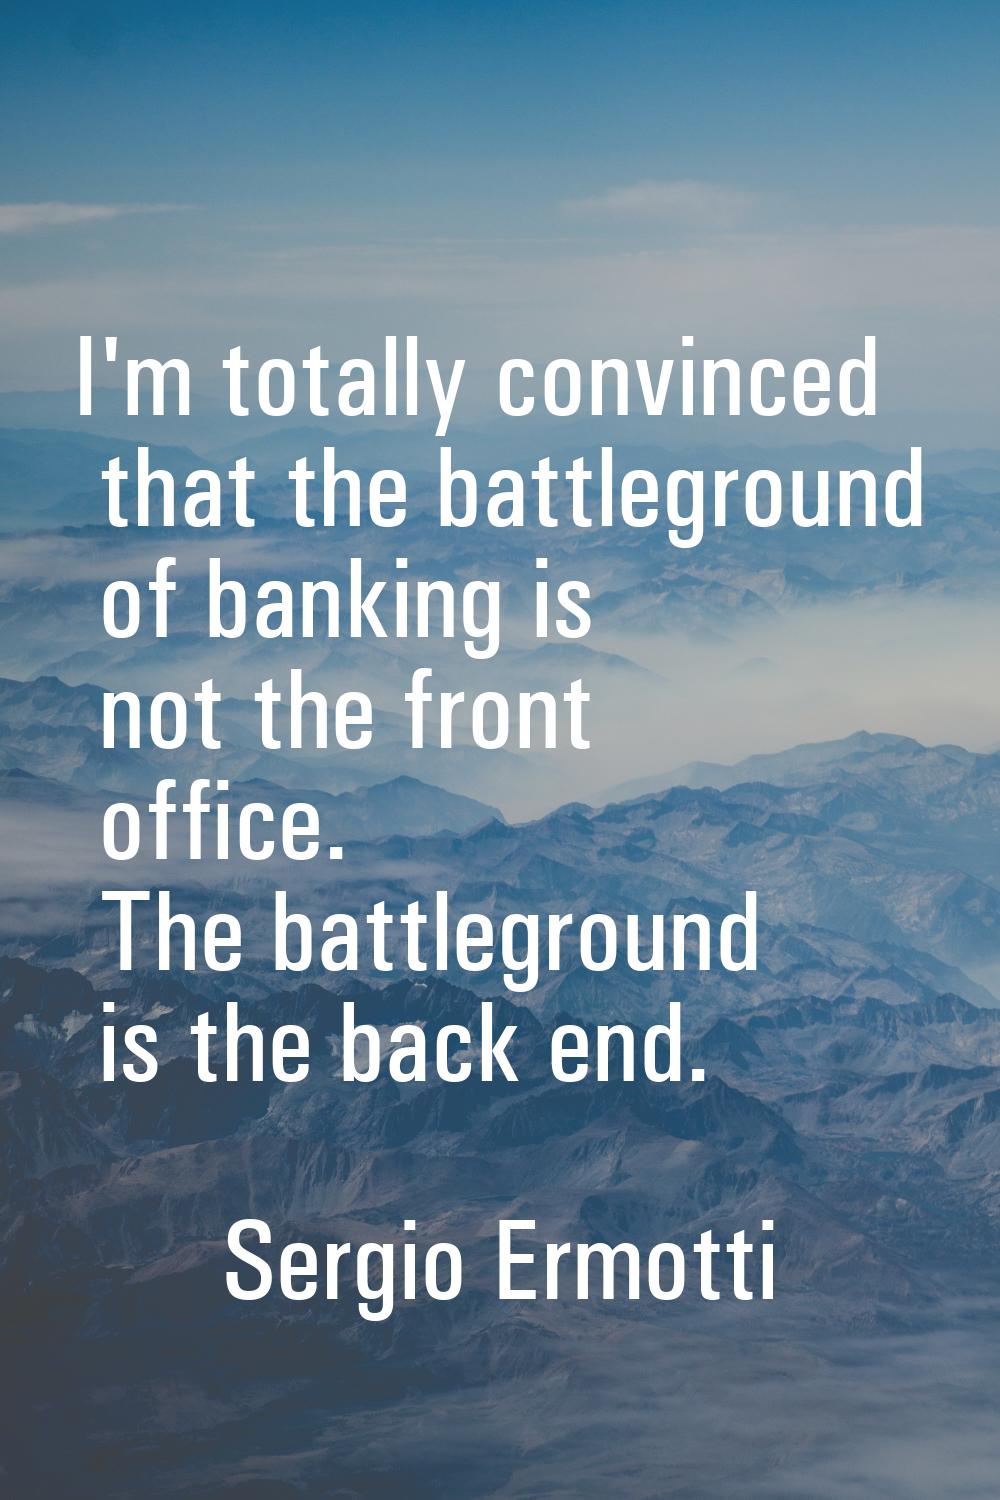 I'm totally convinced that the battleground of banking is not the front office. The battleground is